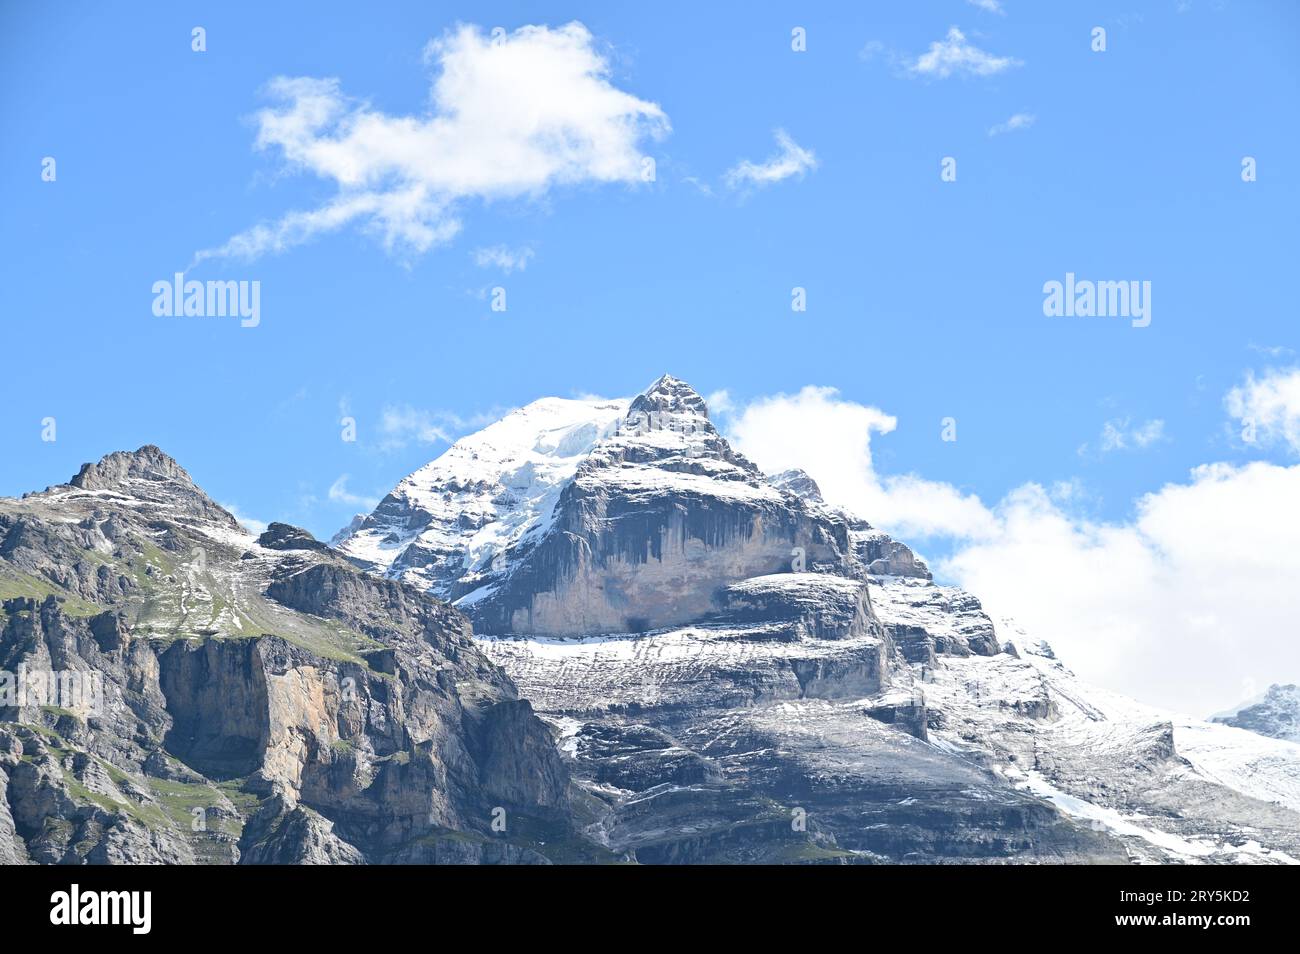 The snow mountain rises high under the blue sky Stock Photo